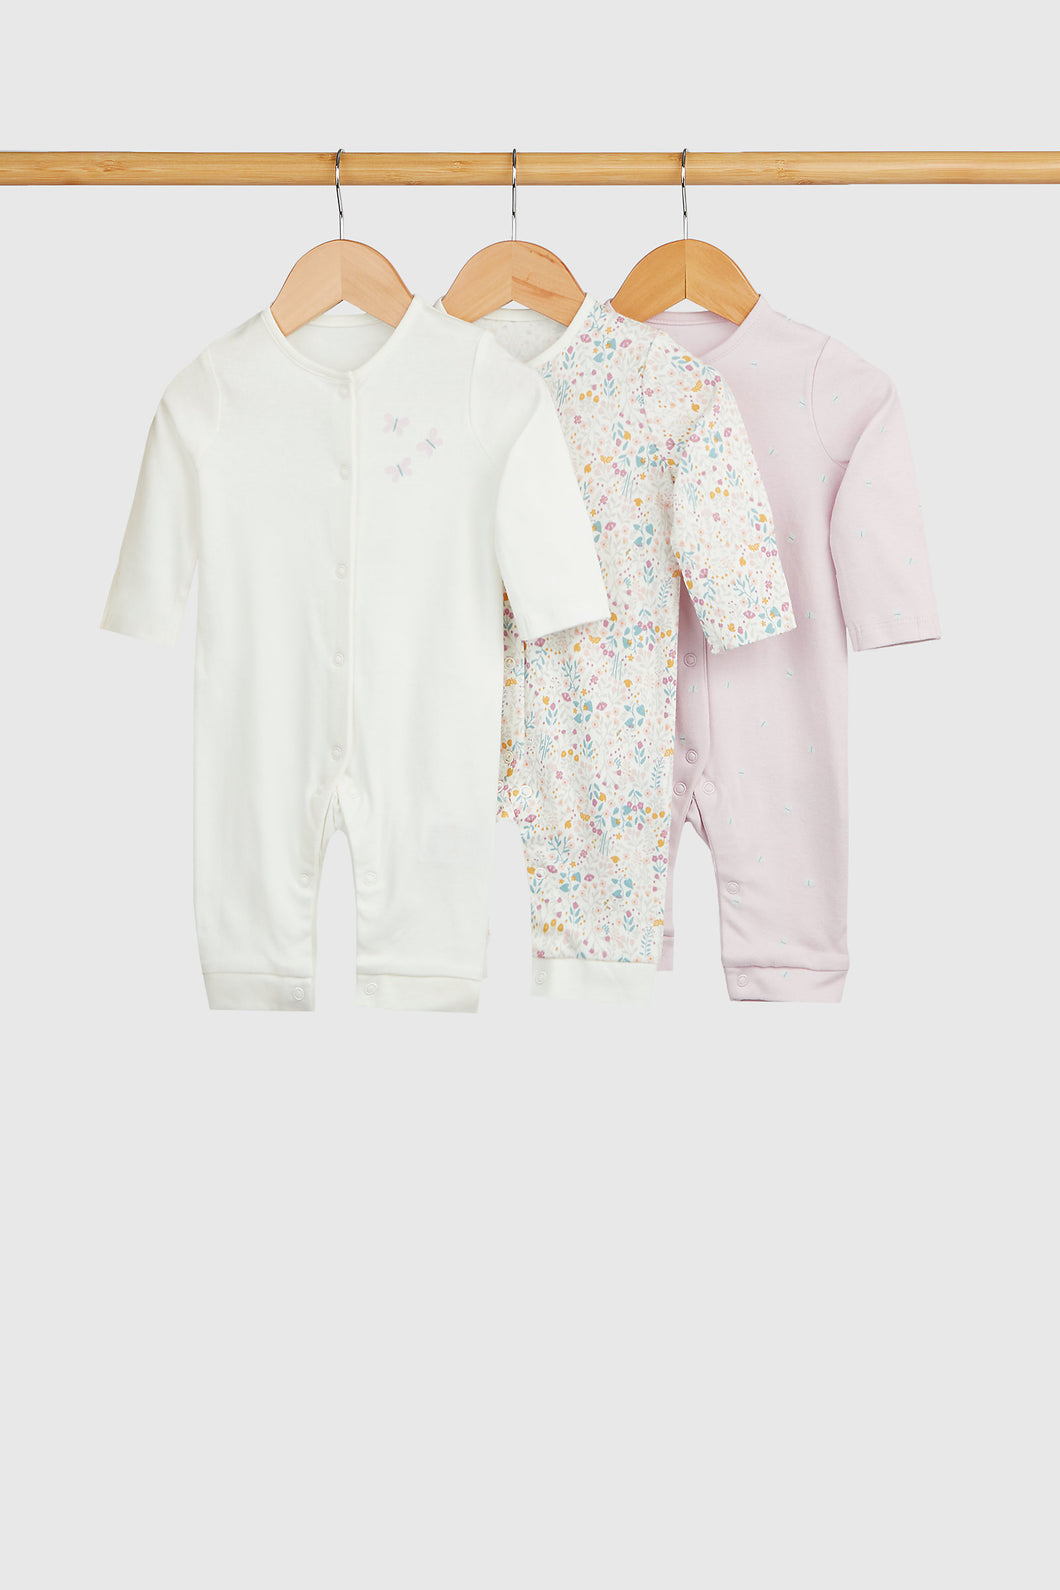 Mothercare Wild Flower Footless Sleepsuits - 3 Pack